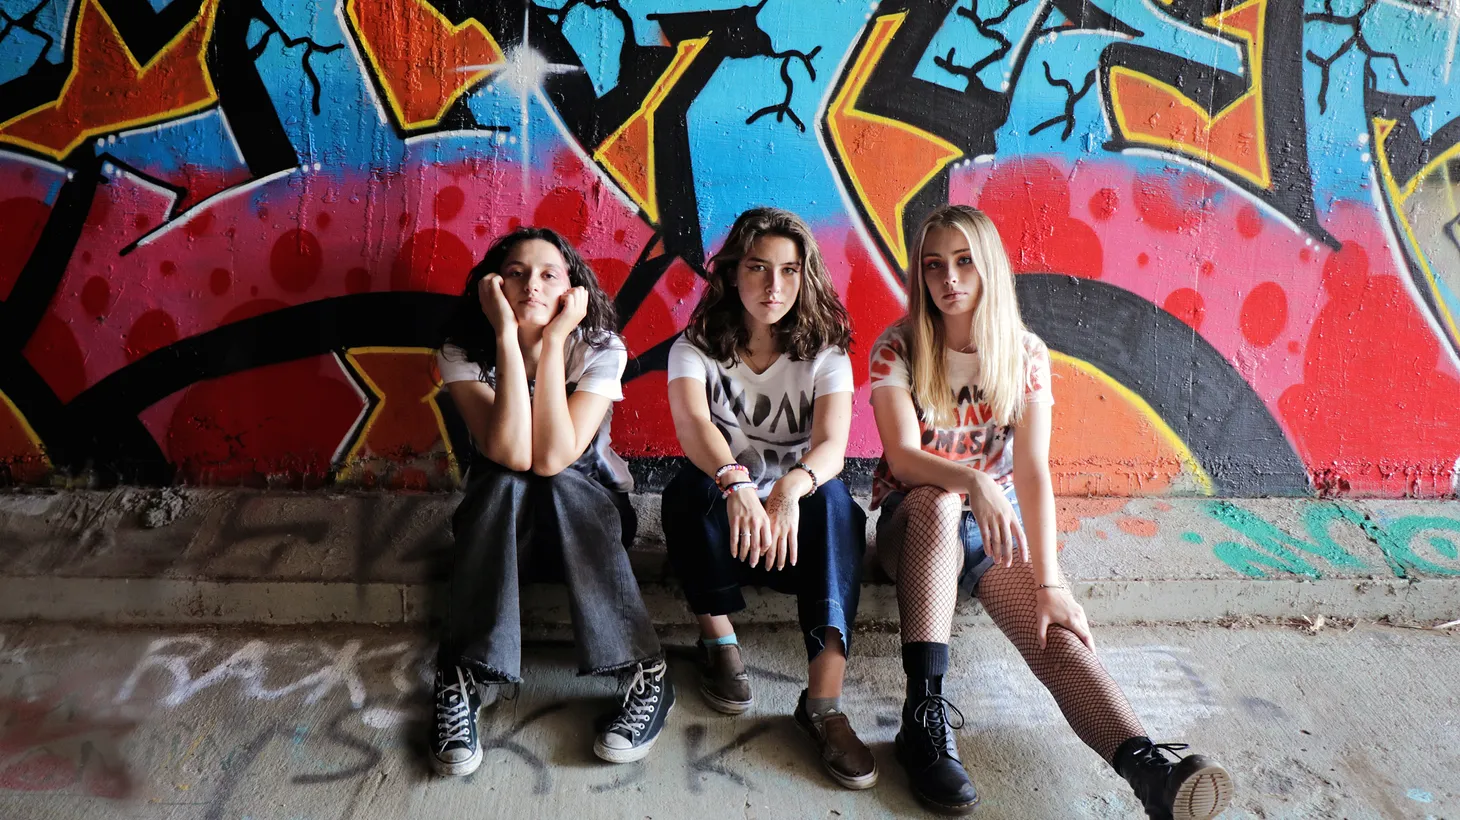 Meet Madam Bombs, one of KCRW’s featured music bands for the Young Creators Project.